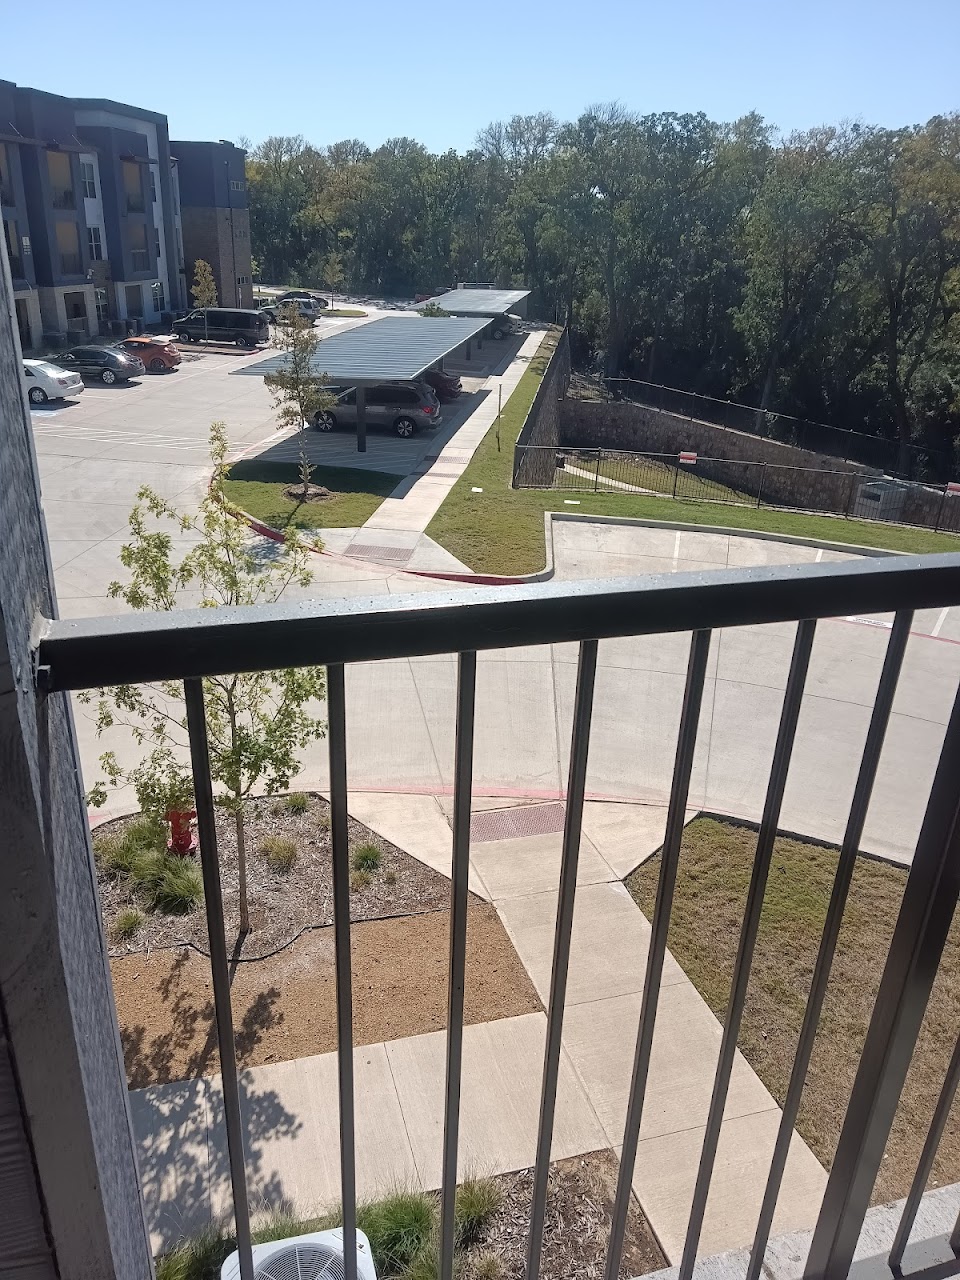 Photo of HAMMACK CREEK. Affordable housing located at NEQ KENNEDALE SUBLETT RD. AND KENNEDALE PKWY. KENNEDALE, TX 76060